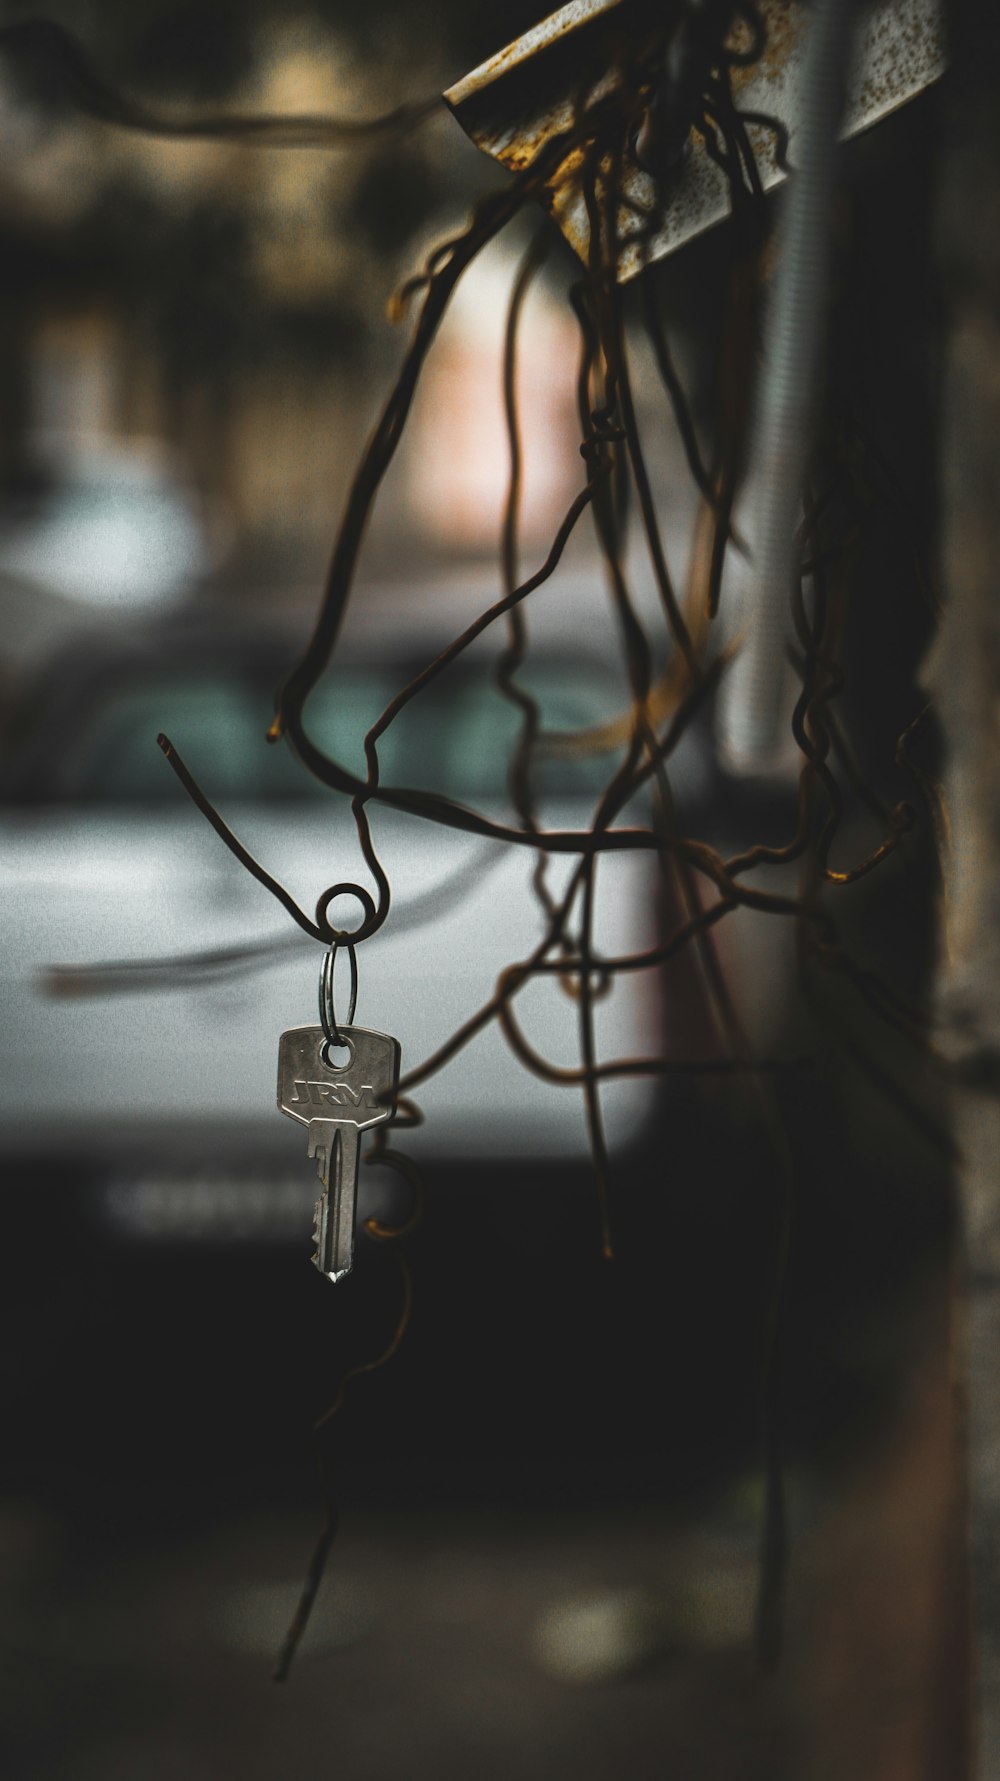 gray key hanging from wire